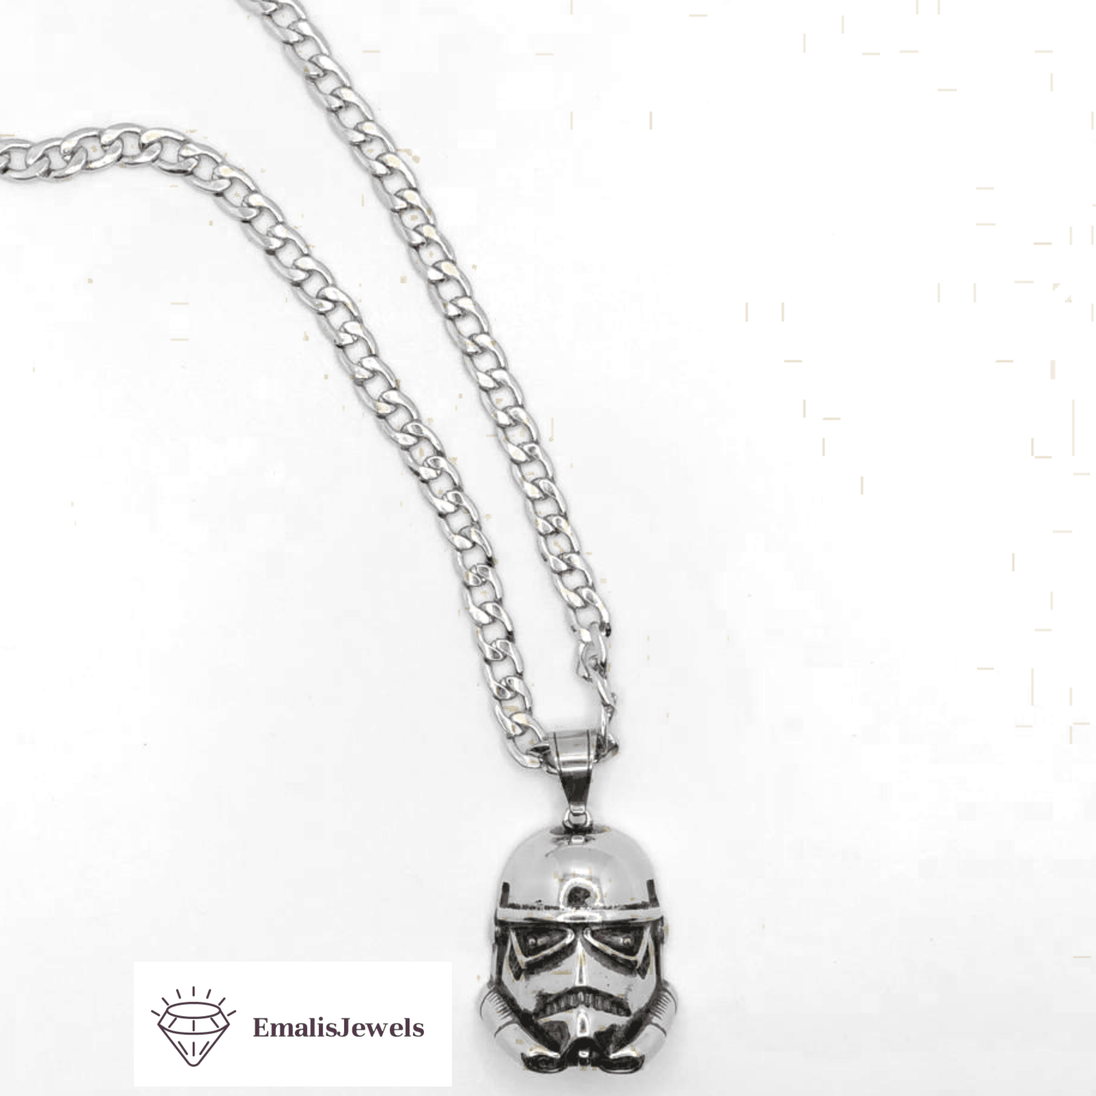 Stainless Steel Chain Necklace and Stainless Steel Vader Villian Pendant - PremiumBrandGoods